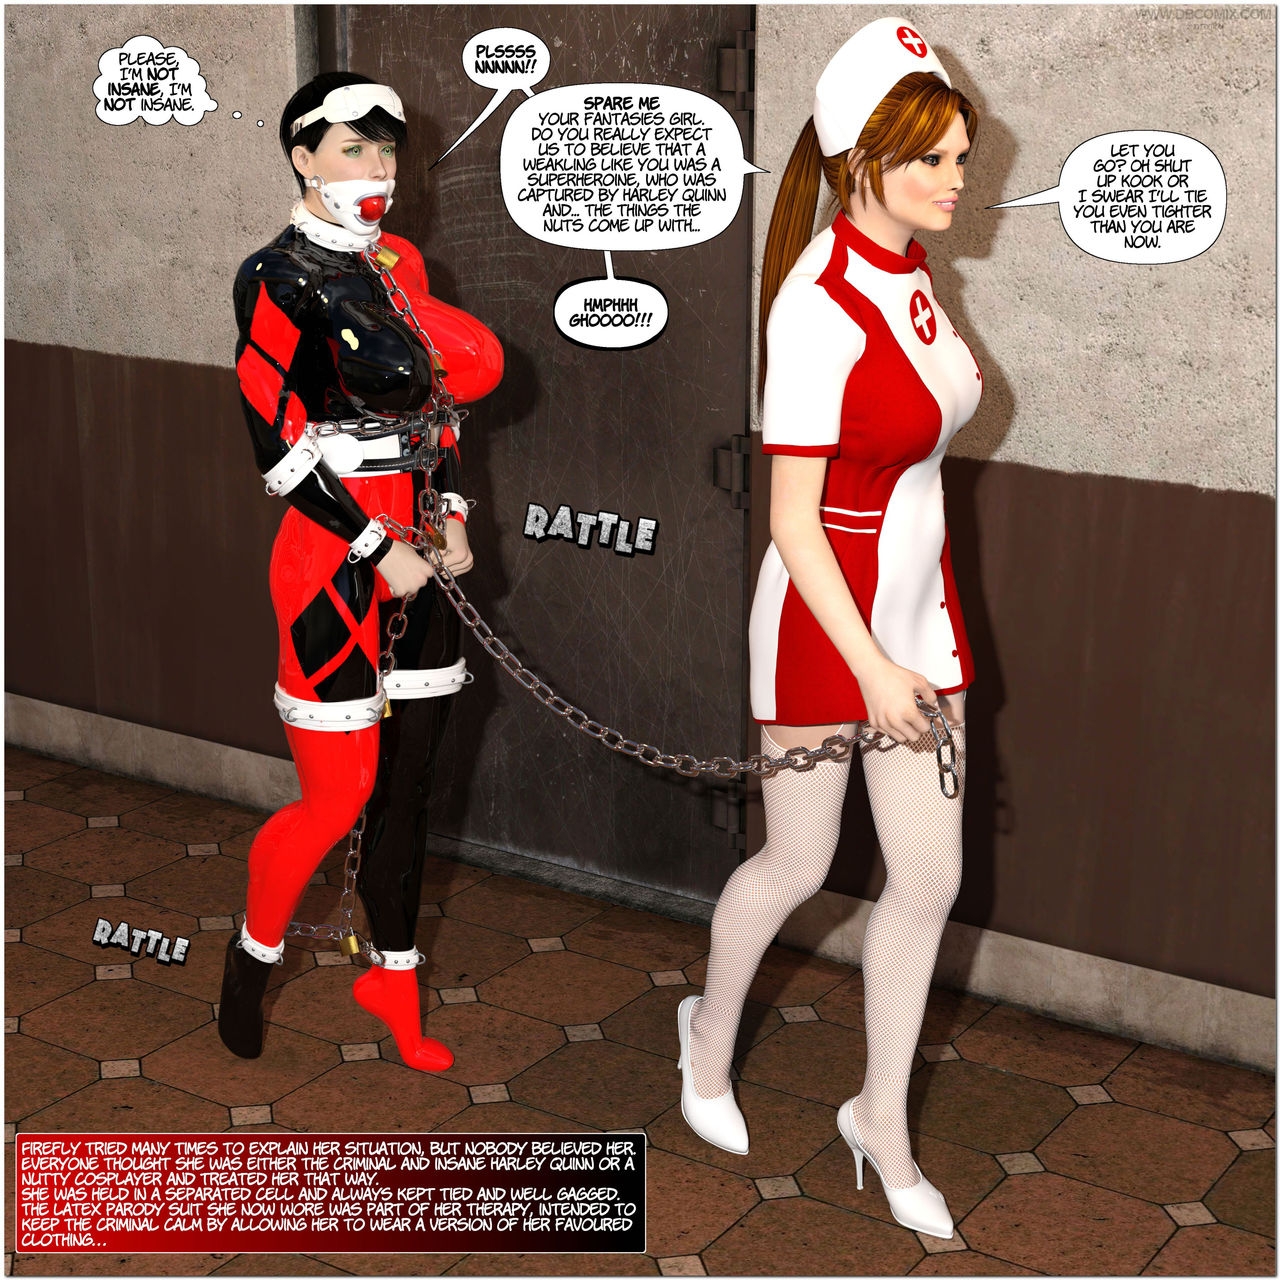 [DBComix] New Arkham For Superheroines 1 2nd Edition - Humiliation and Degradation of Power Girl 2